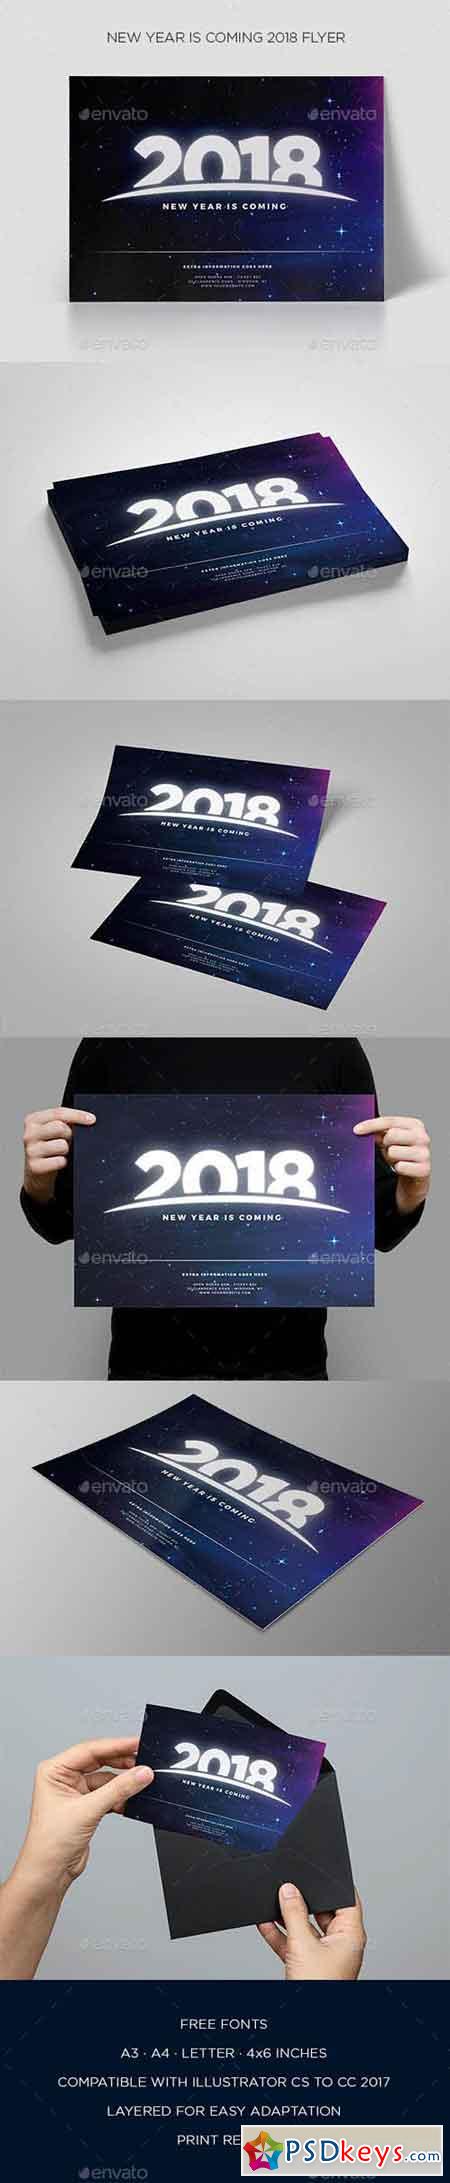 New Year Coming 2018 Flyer 20924533